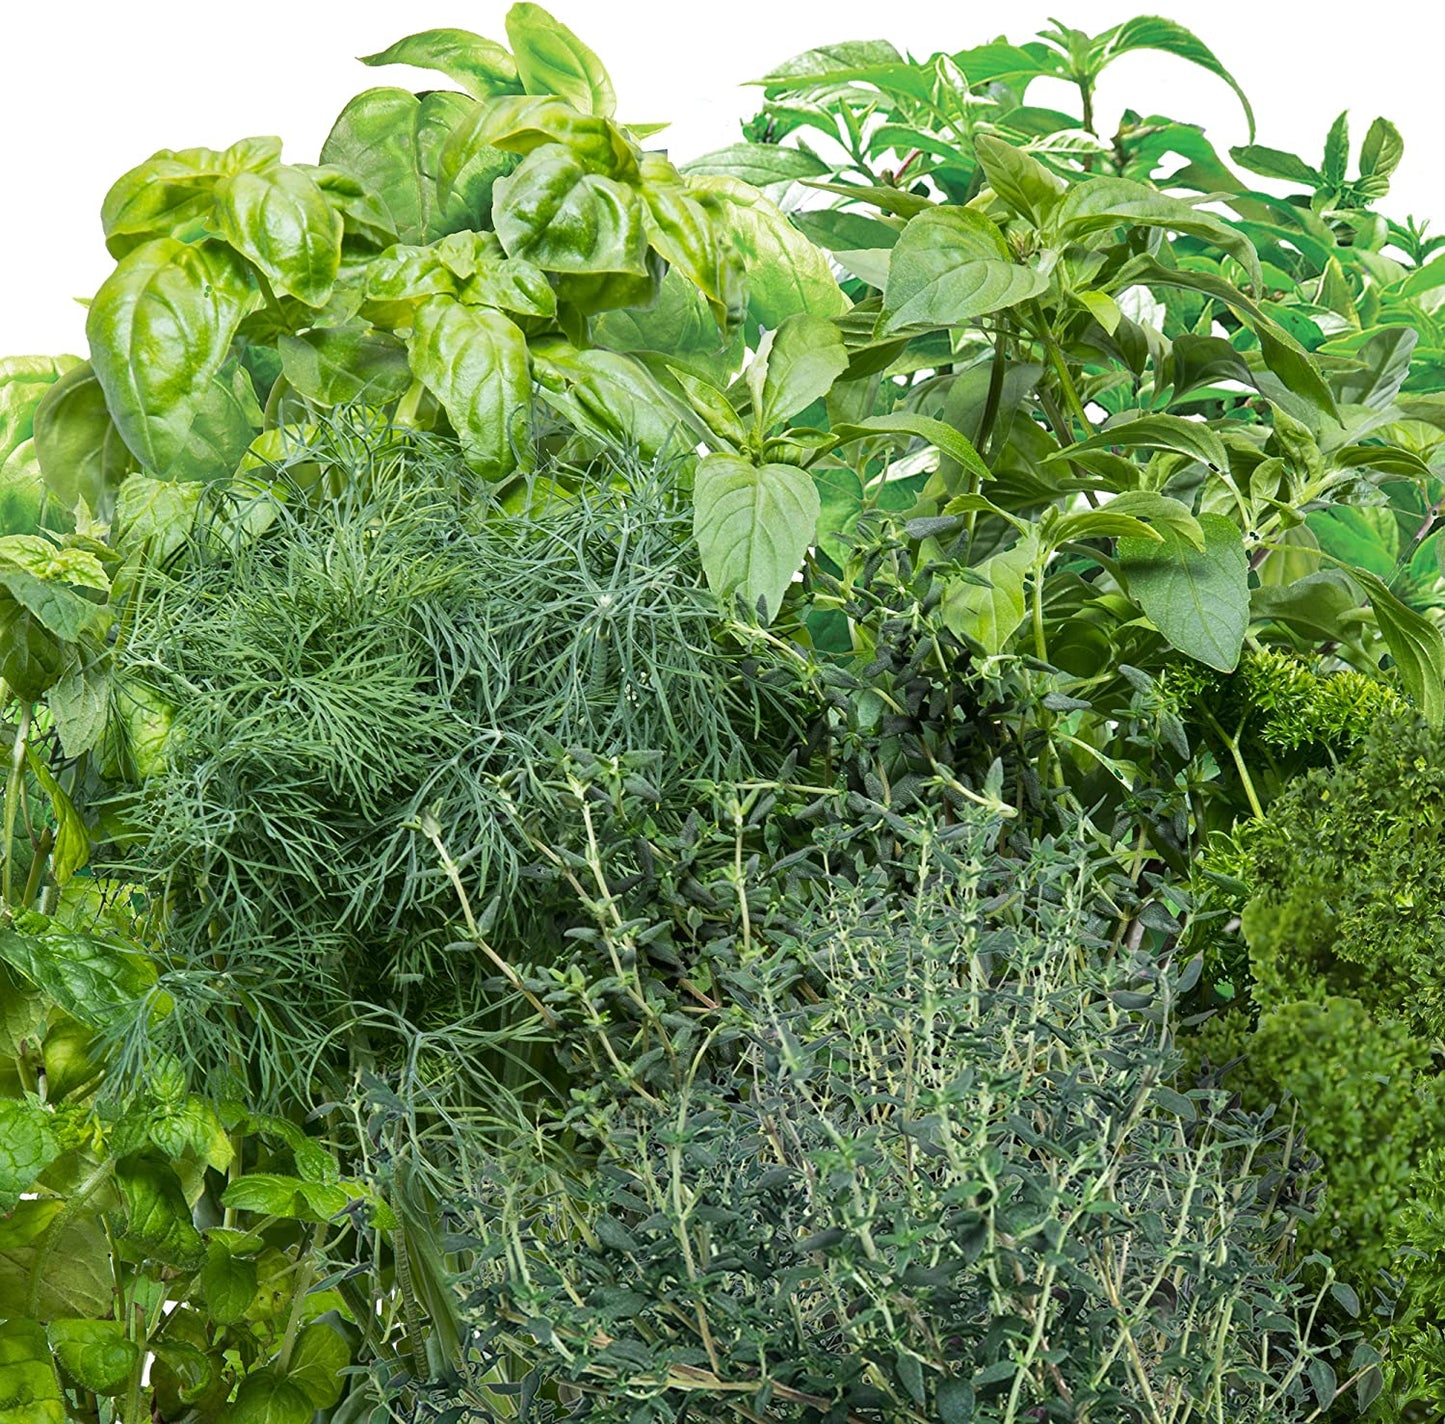 A large variety and bunches of different types of green herbs.